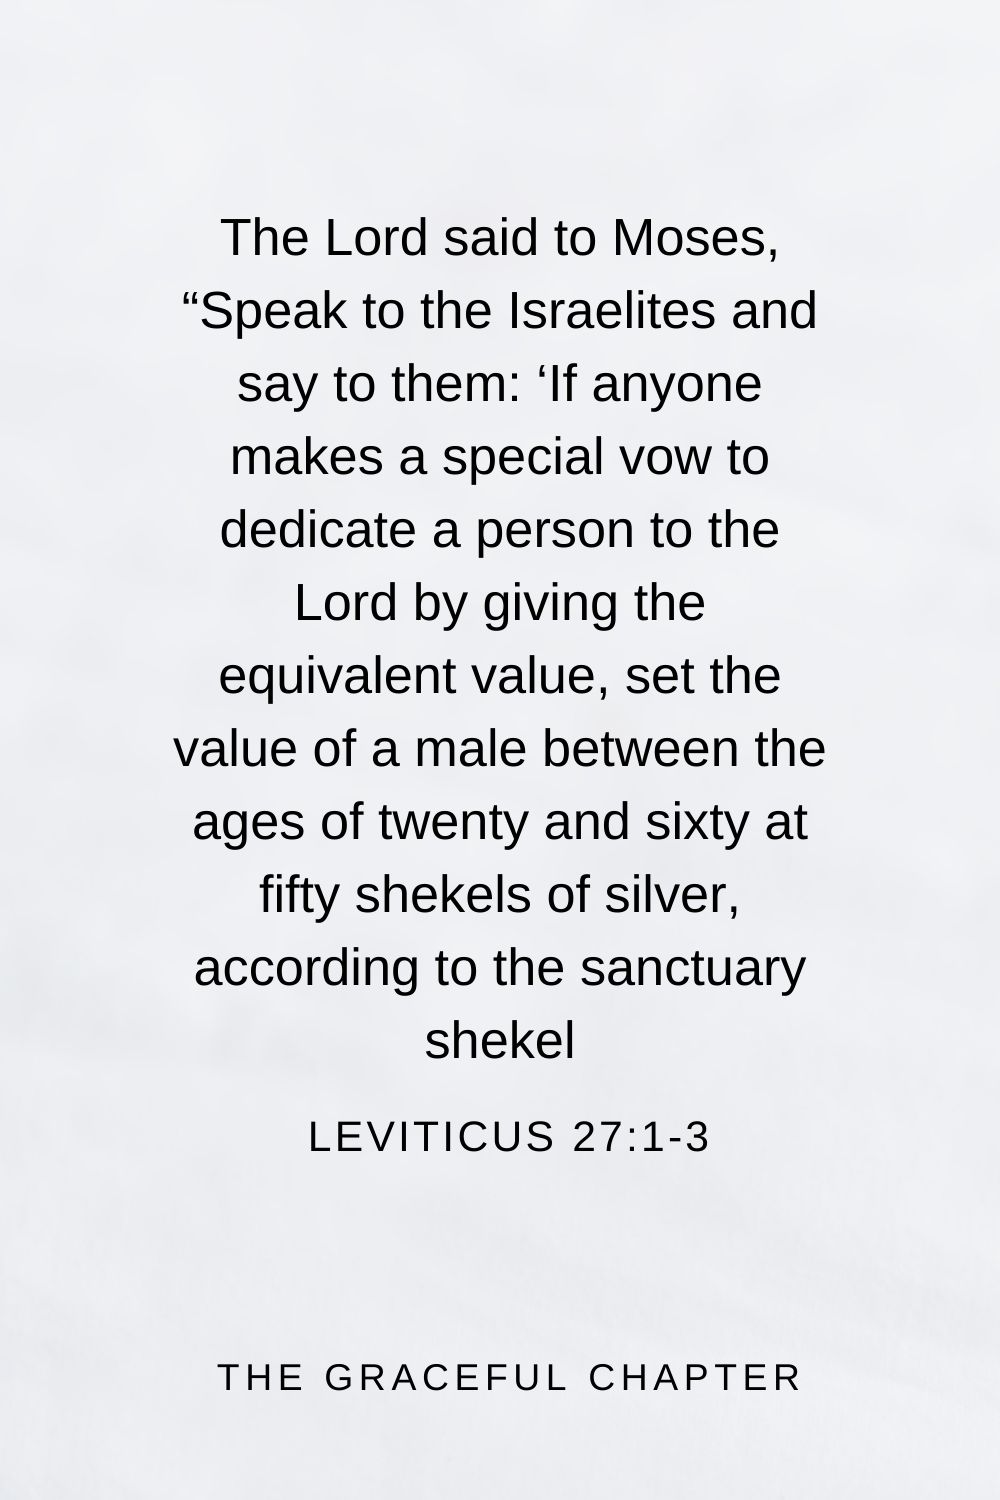 The Lord said to Moses, “Speak to the Israelites and say to them: ‘If anyone makes a special vow to dedicate a person to the Lord by giving the equivalent value, set the value of a male between the ages of twenty and sixty at fifty shekels of silver, according to the sanctuary shekel Leviticus 27:1-3